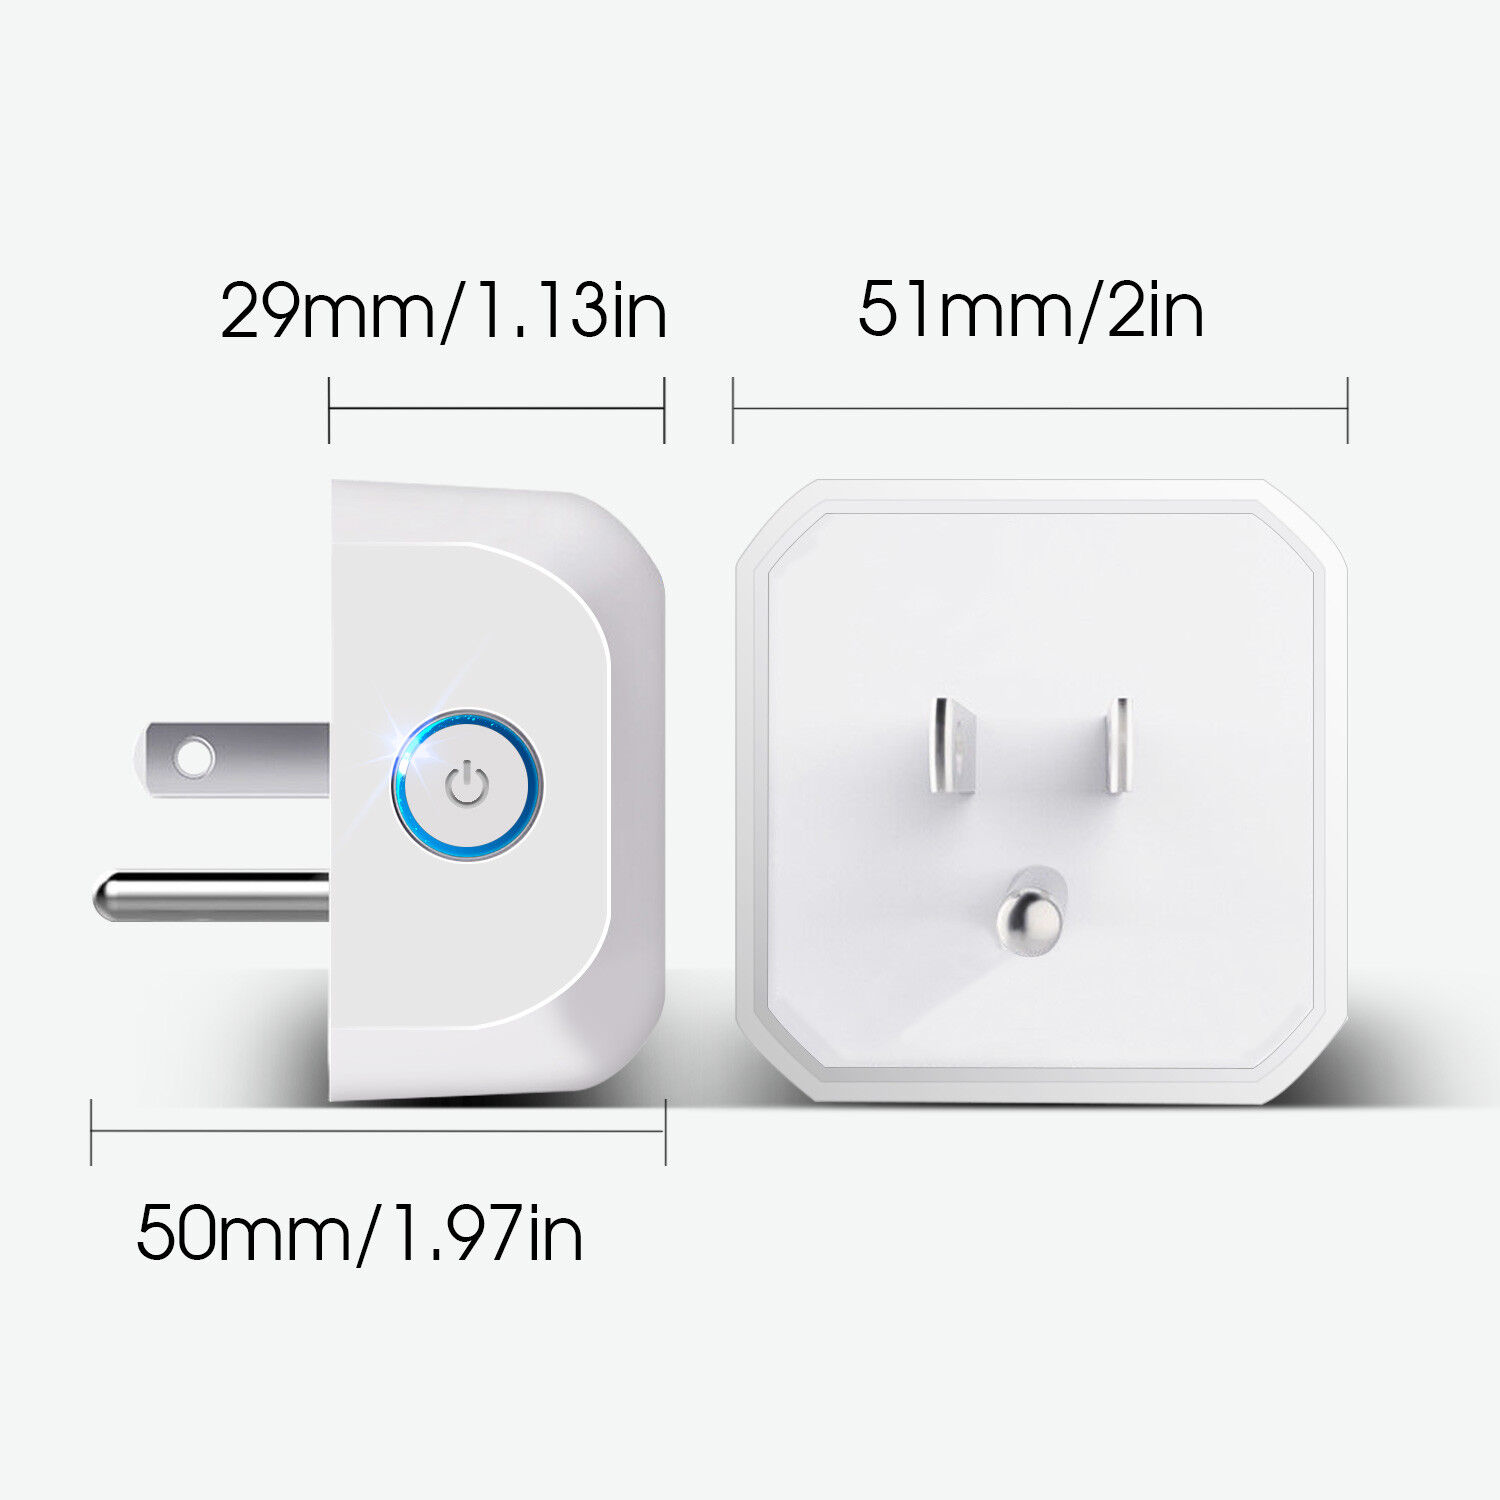 4pack Smart WIFI APP Remote Control Timer Switch Power Socket Outlet US Plug Kootion Does Not Apply - фотография #8